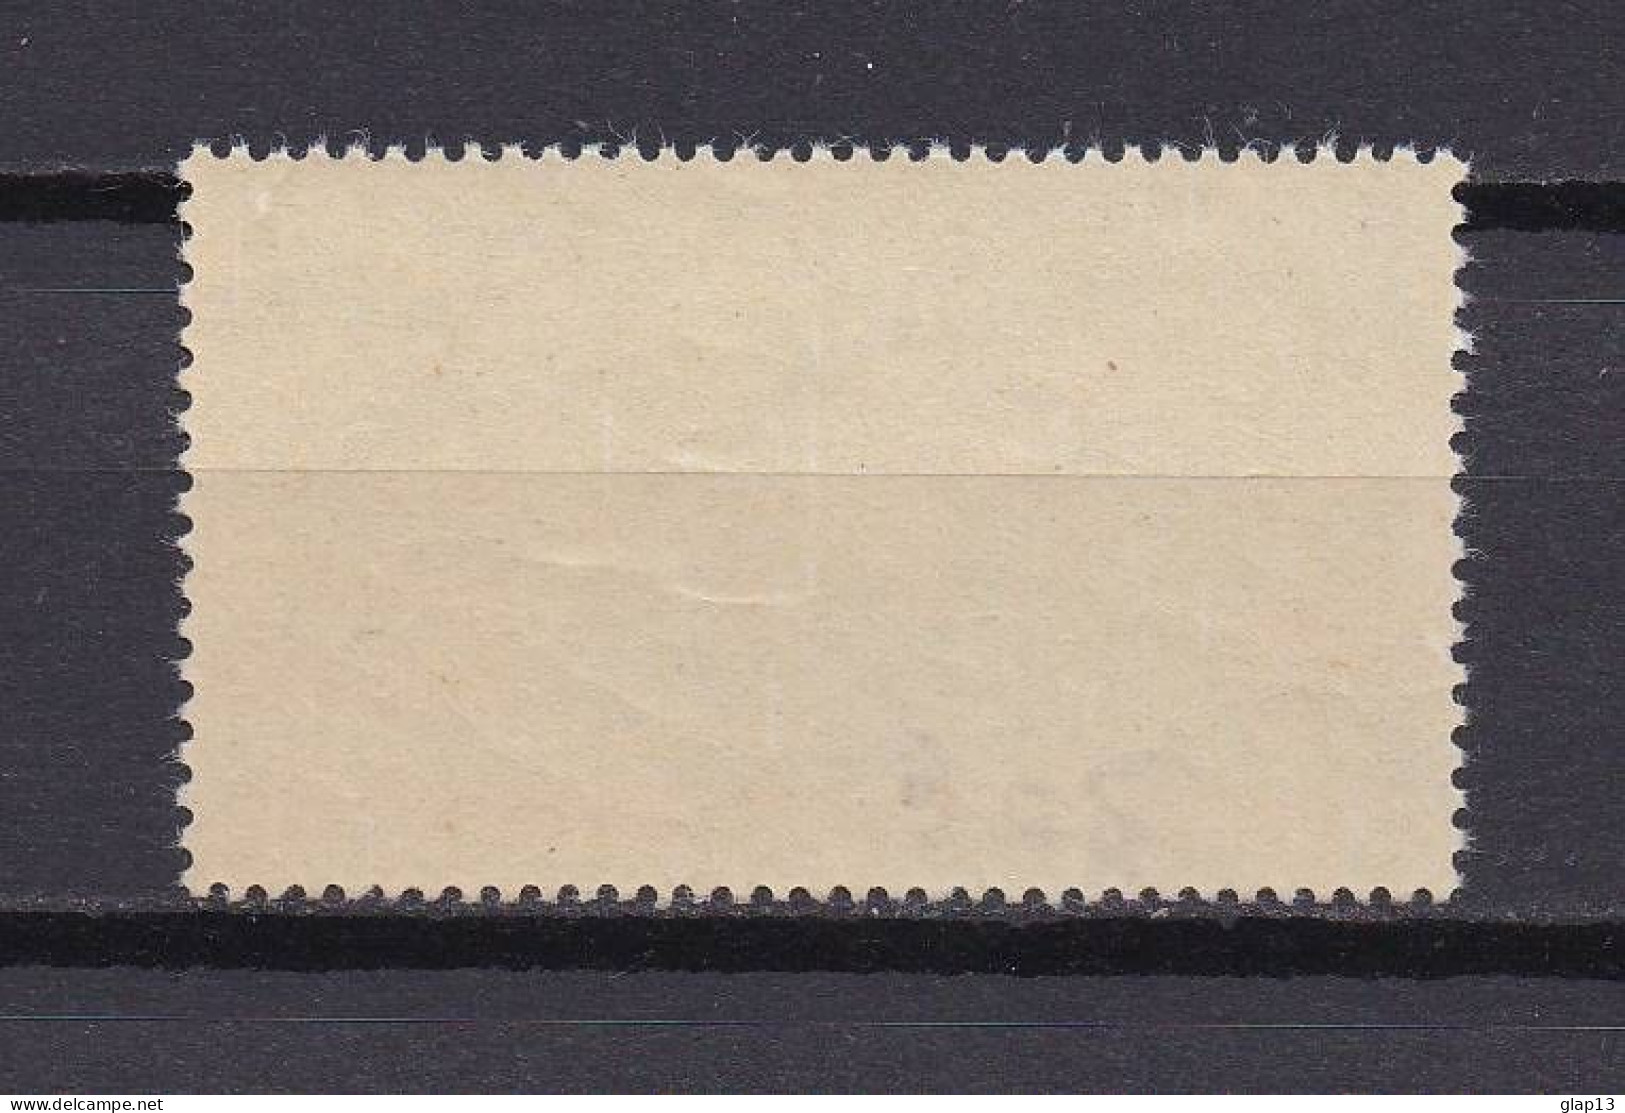 NOUVELLE-CALEDONIE 1962 TIMBRE N°305 NEUF AVEC CHARNIERE CONFERENCE - Nuovi